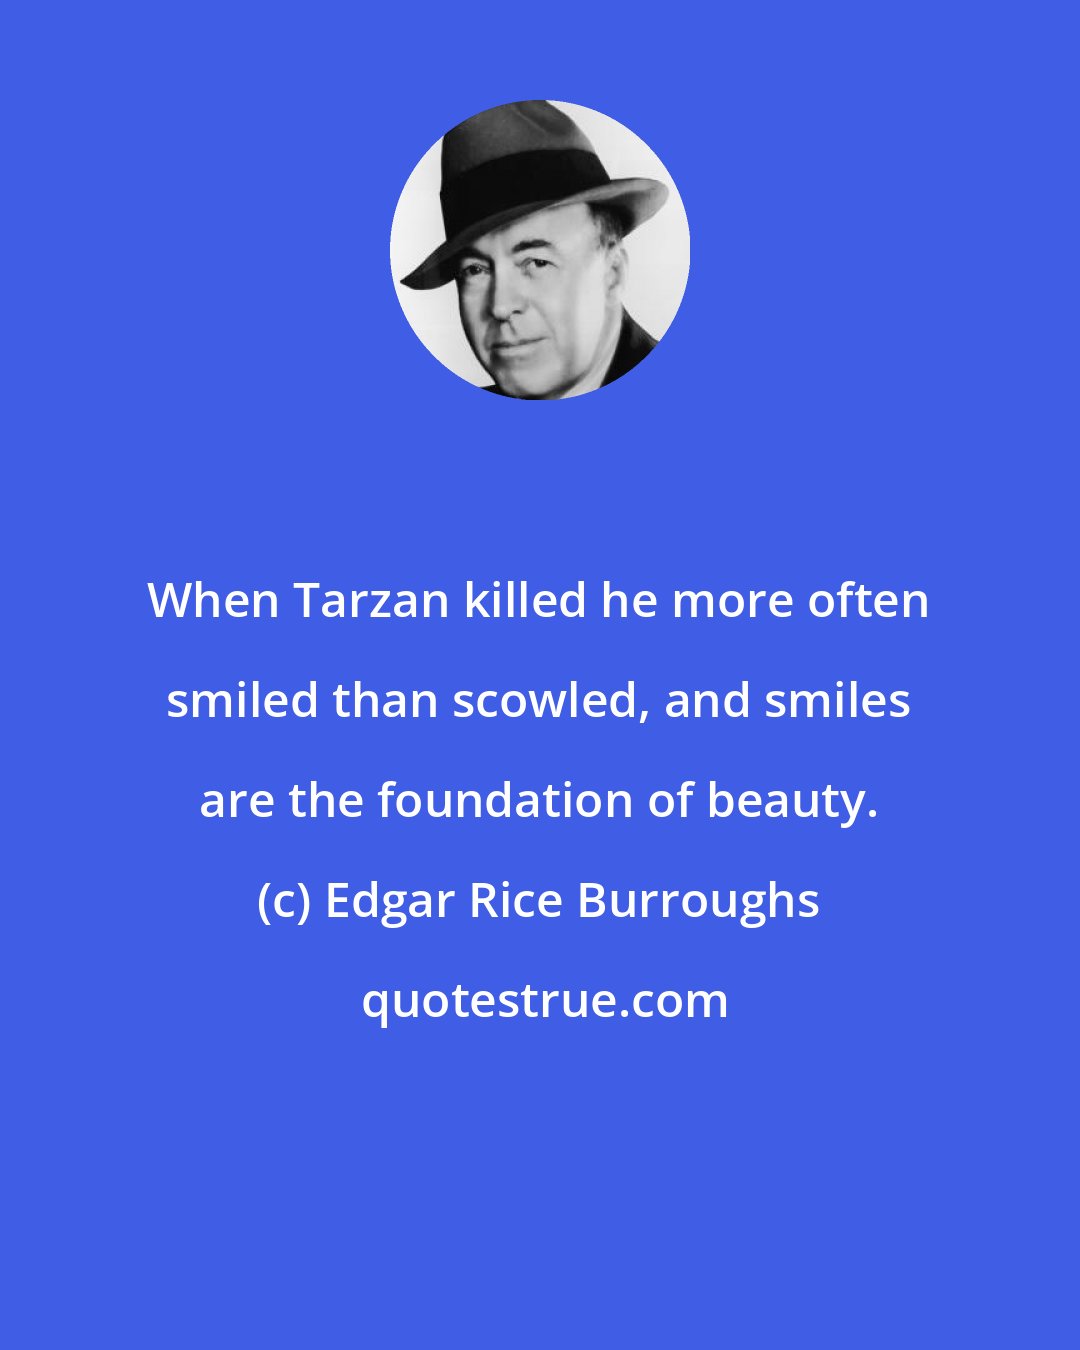 Edgar Rice Burroughs: When Tarzan killed he more often smiled than scowled, and smiles are the foundation of beauty.